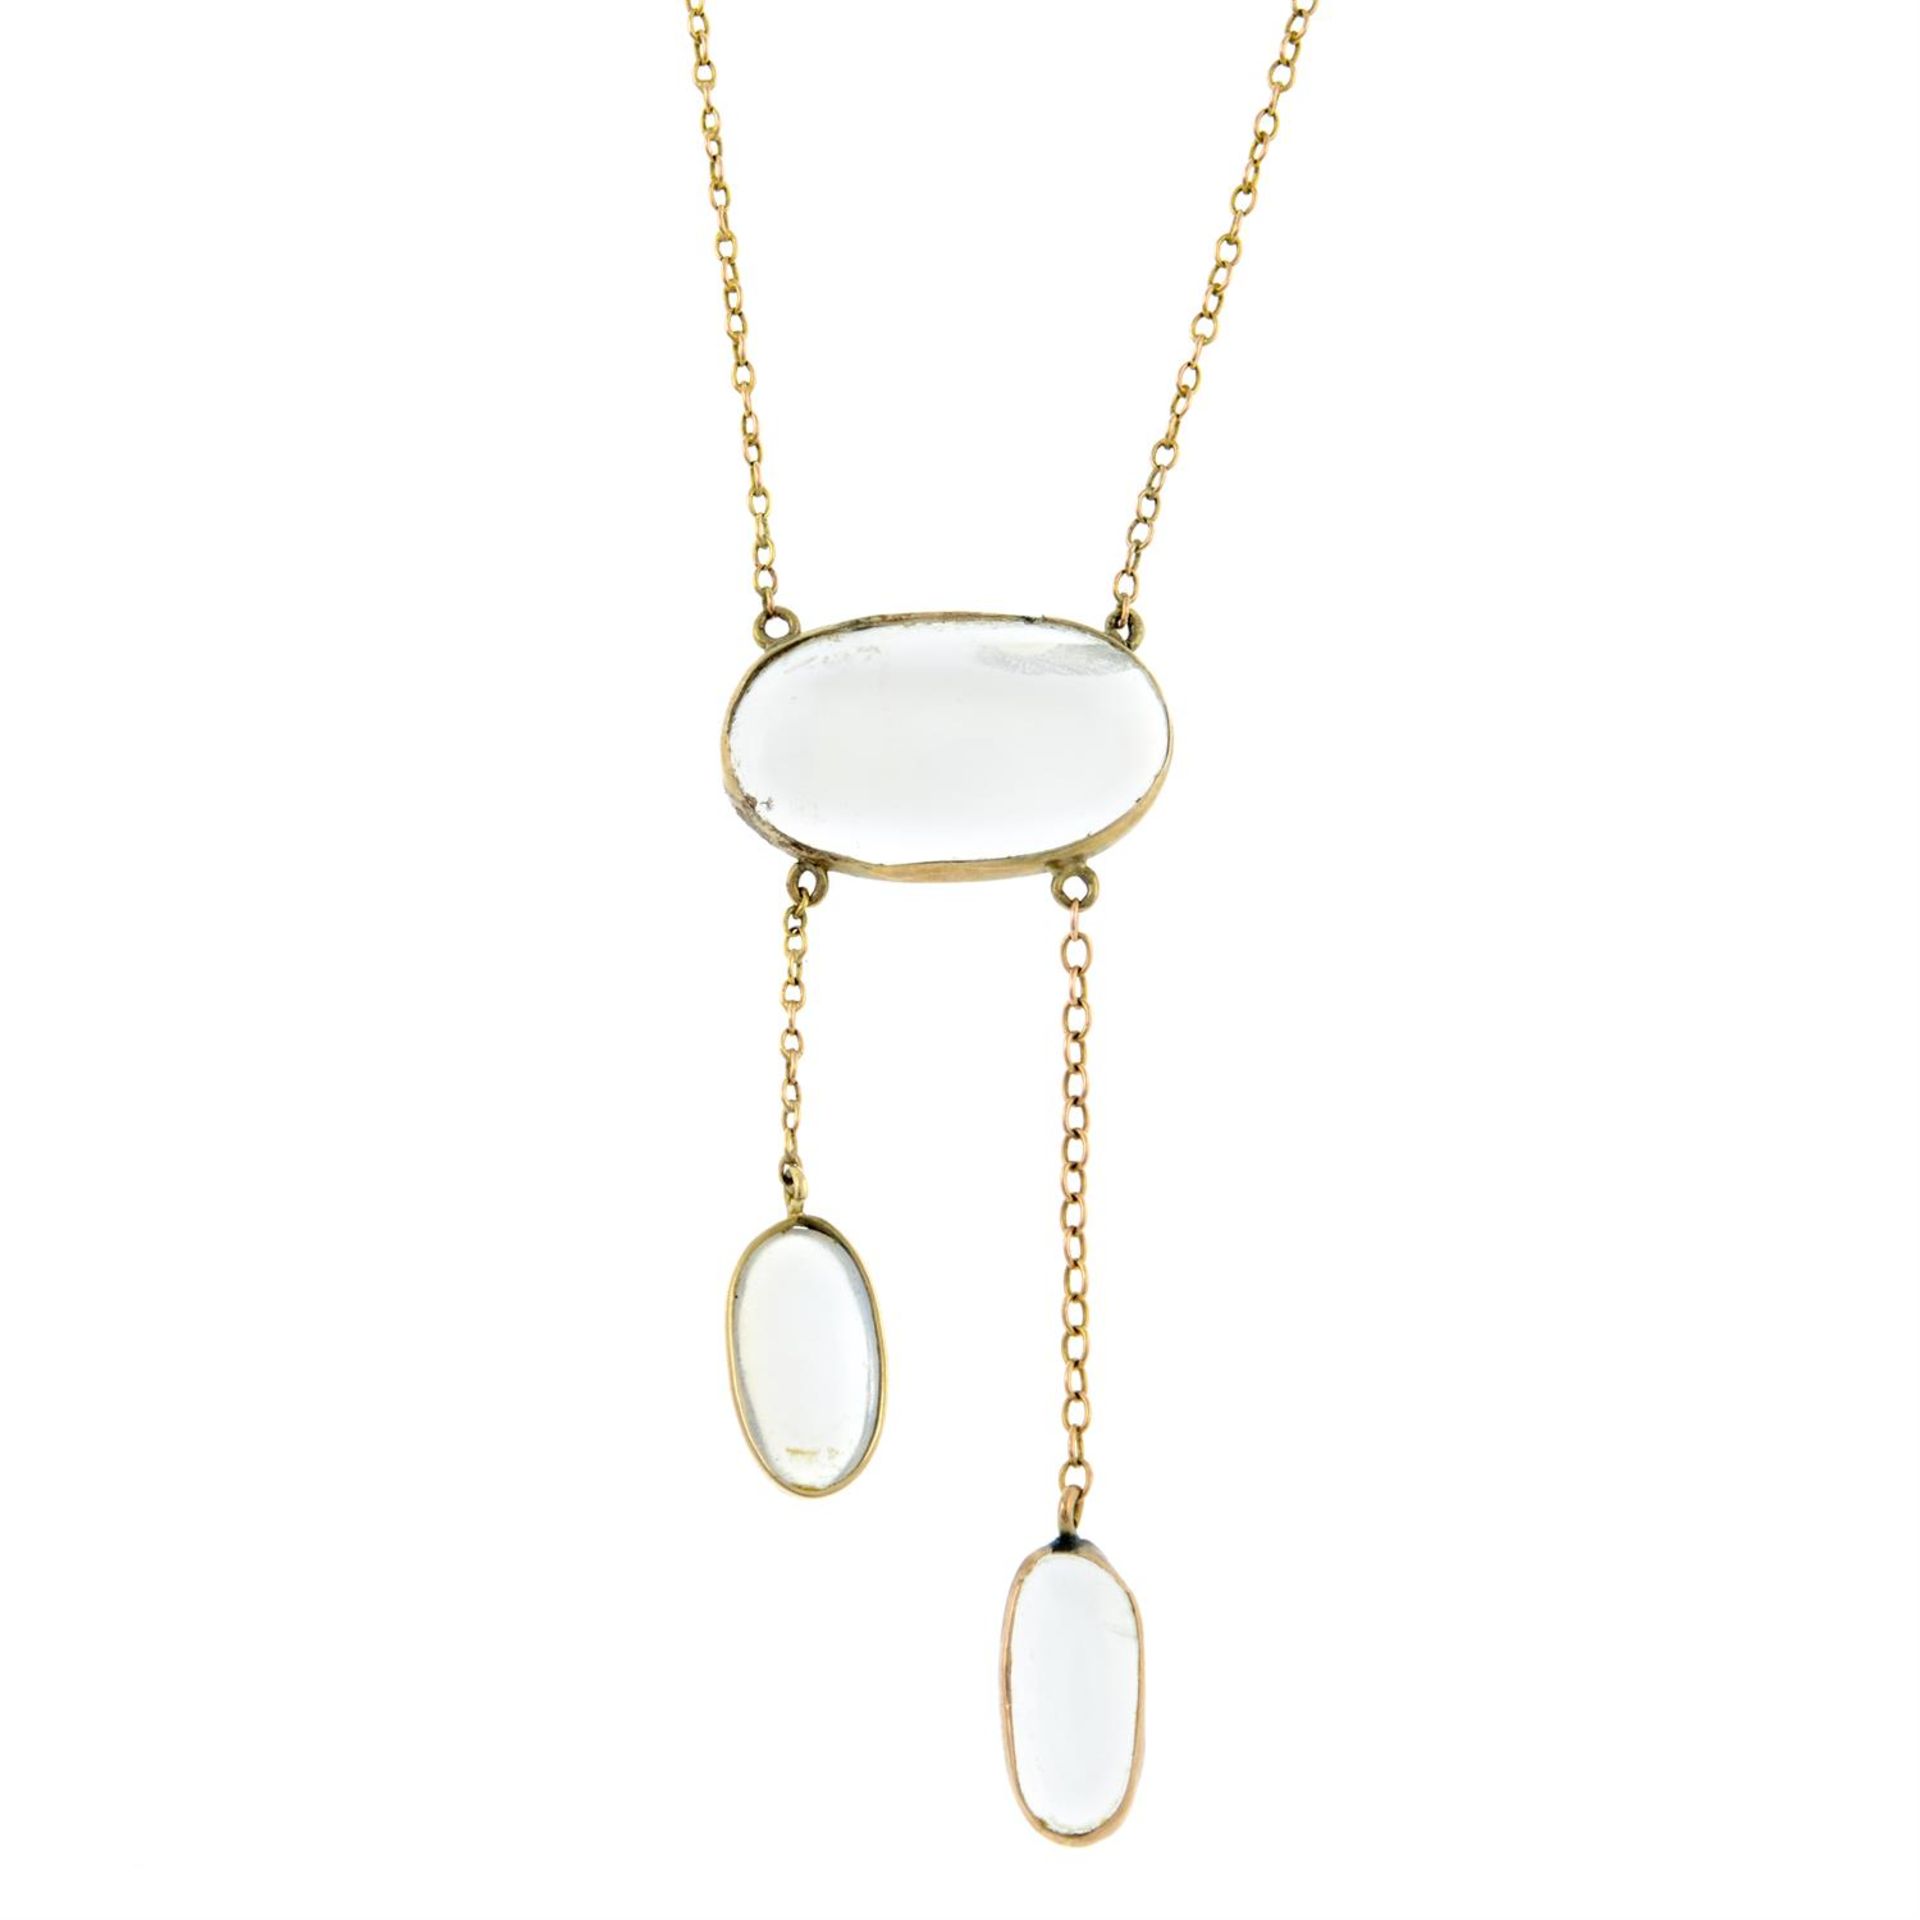 An early 20th century gold moonstone negligee pendant, with integral chain.